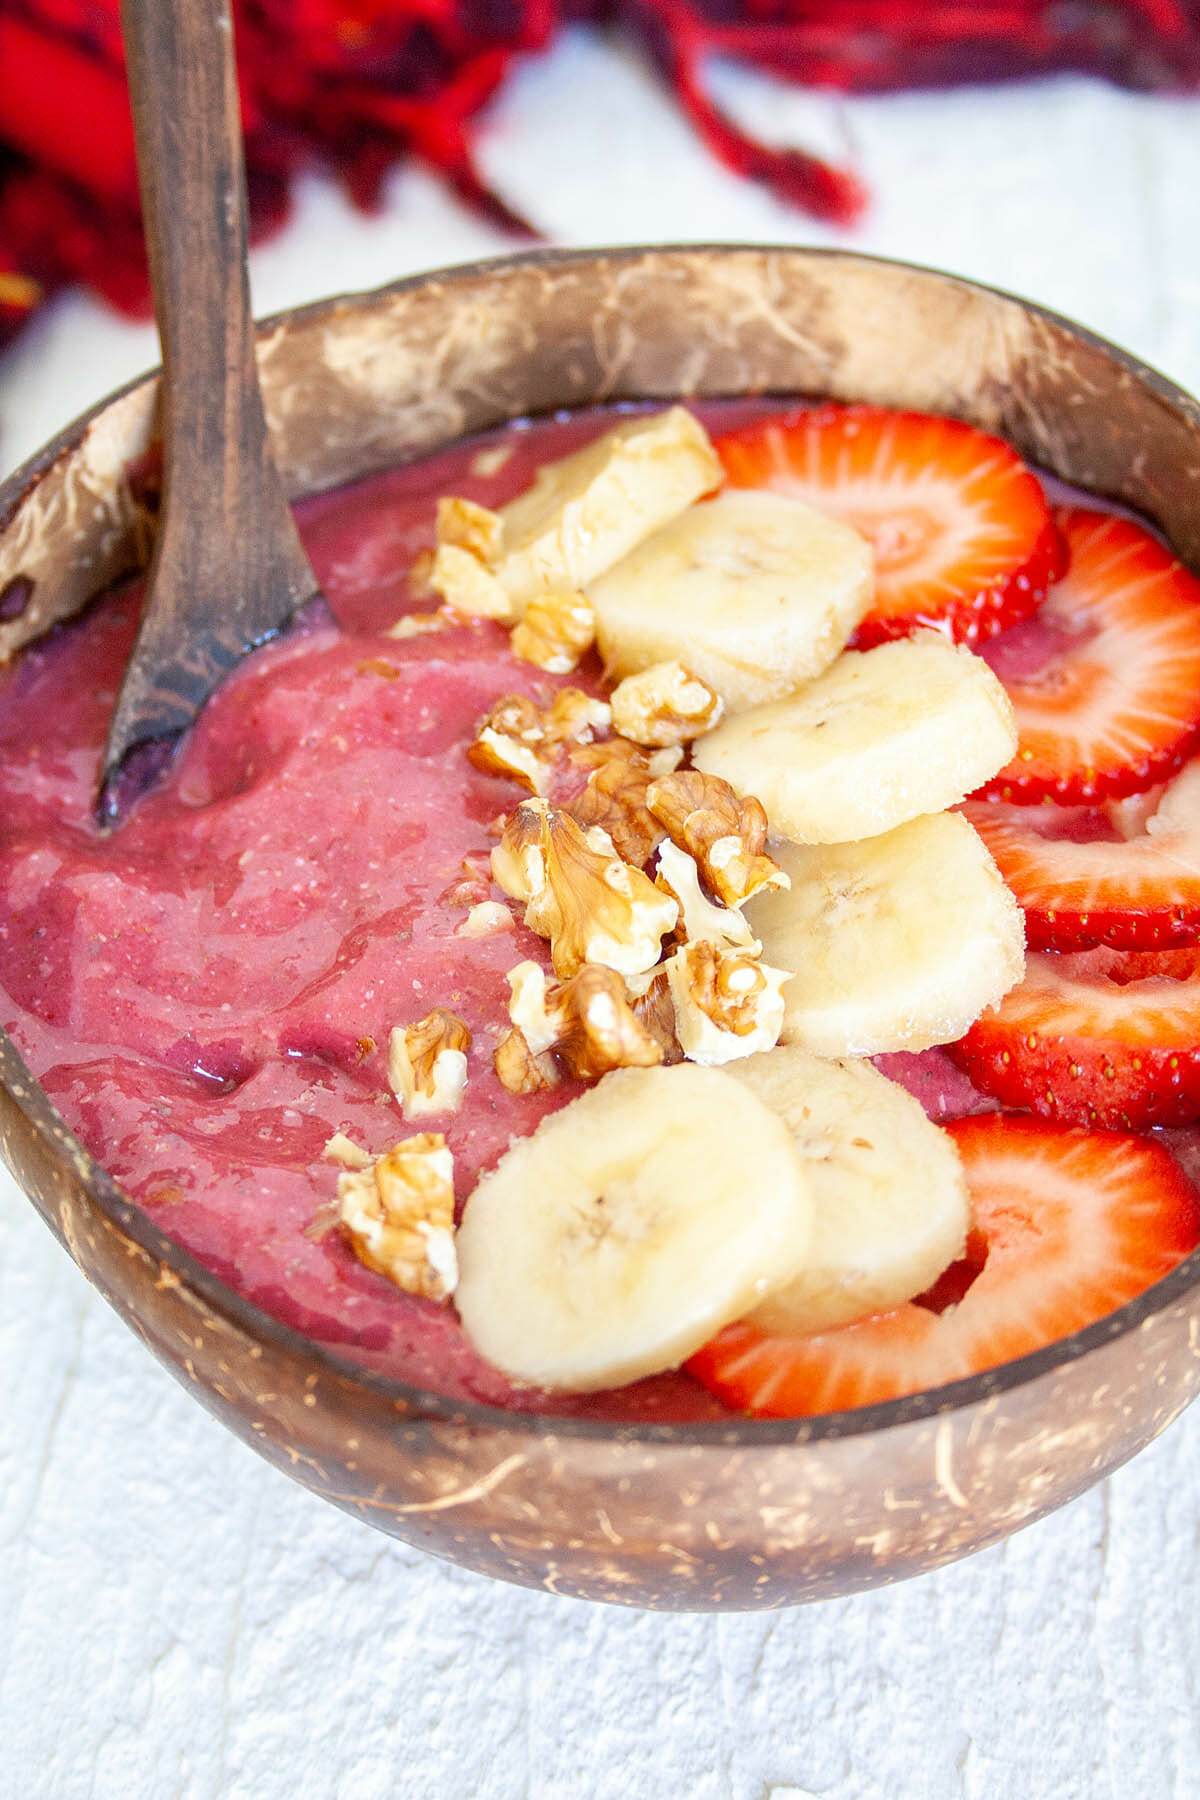 Strawberry Beet Smoothie Bowl with spoon close up.